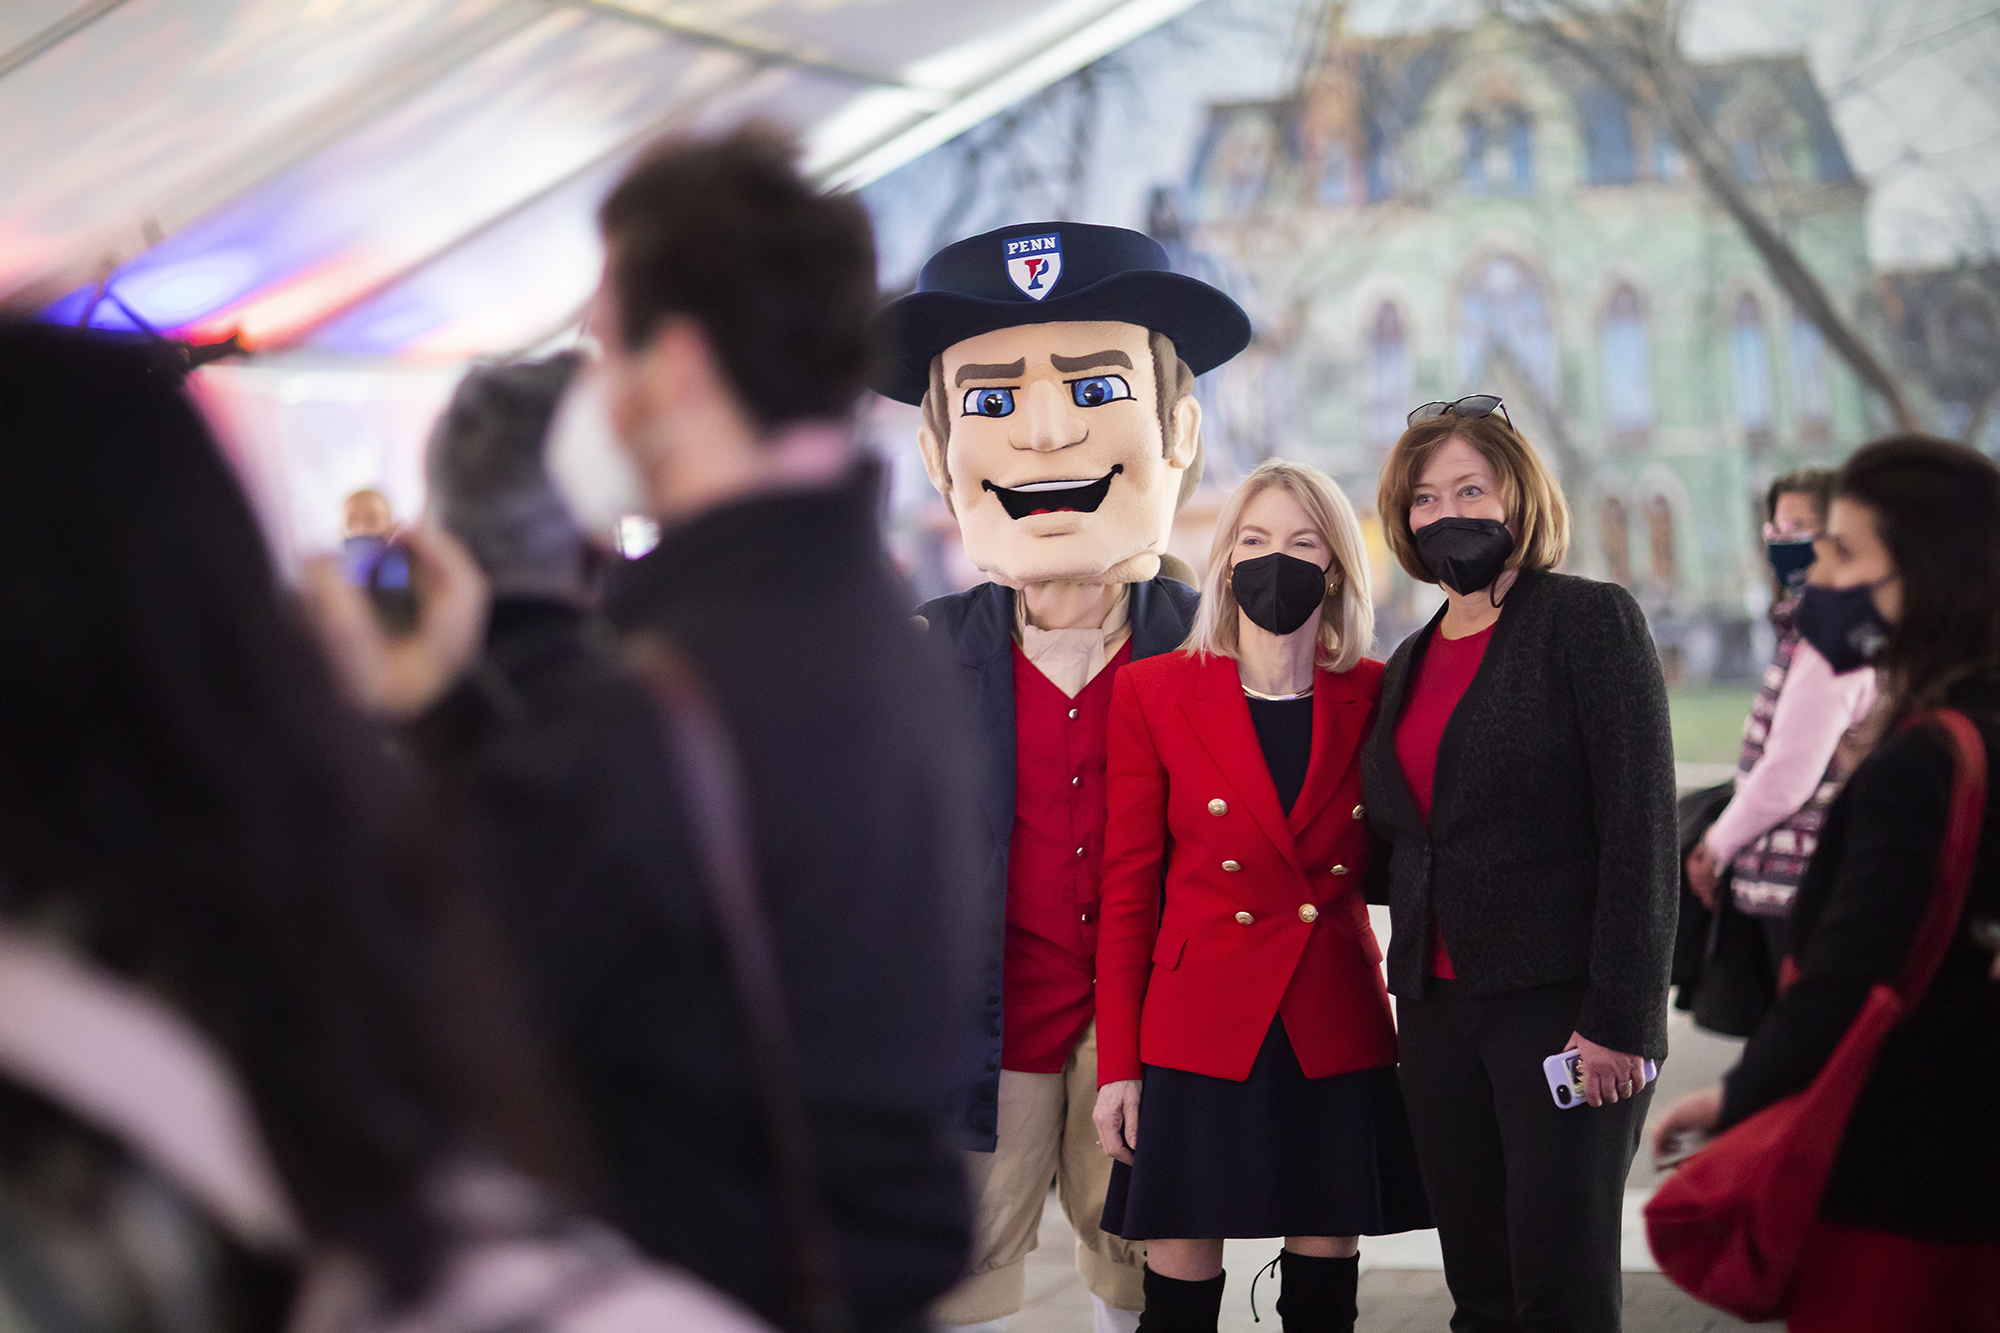 Penn President Amy Gutmann and Penn Quaker mascot and others in a party tent.